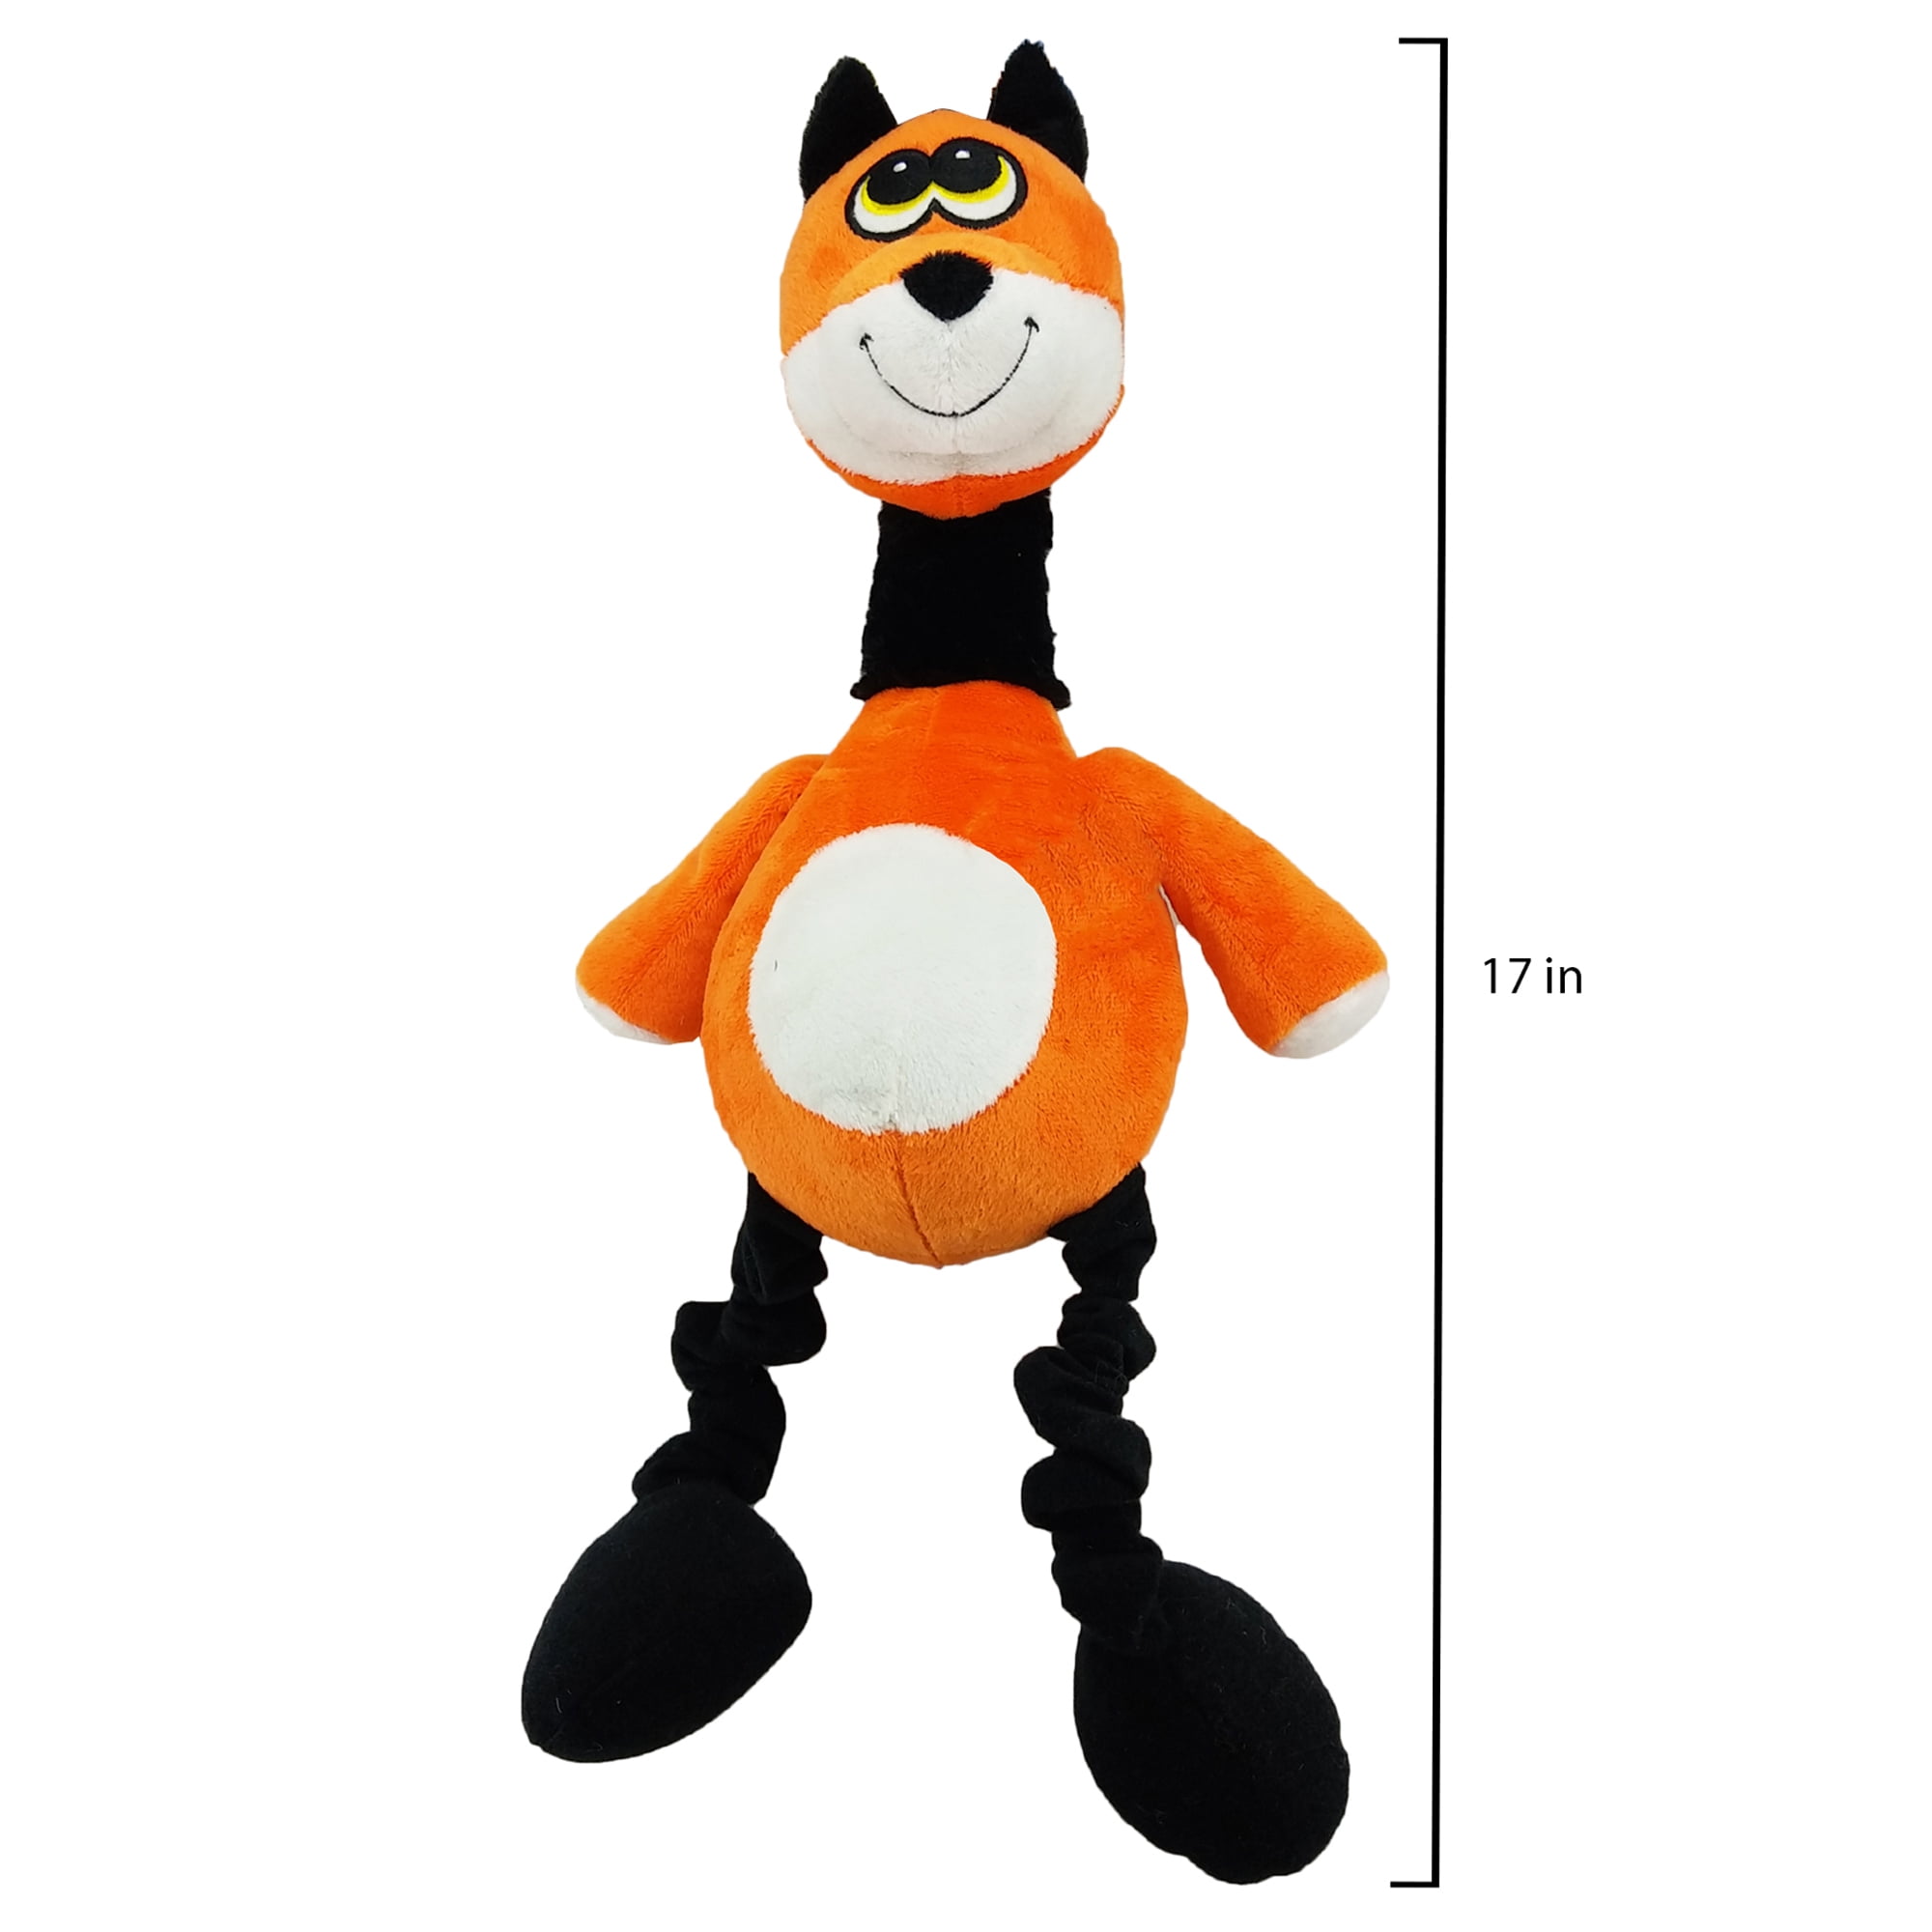 Pet Craft Supply Jiggle Giggle Funny Giggling Sound Wiggly Shaking Tug Fetch Soft Chew Plush Dog Toy